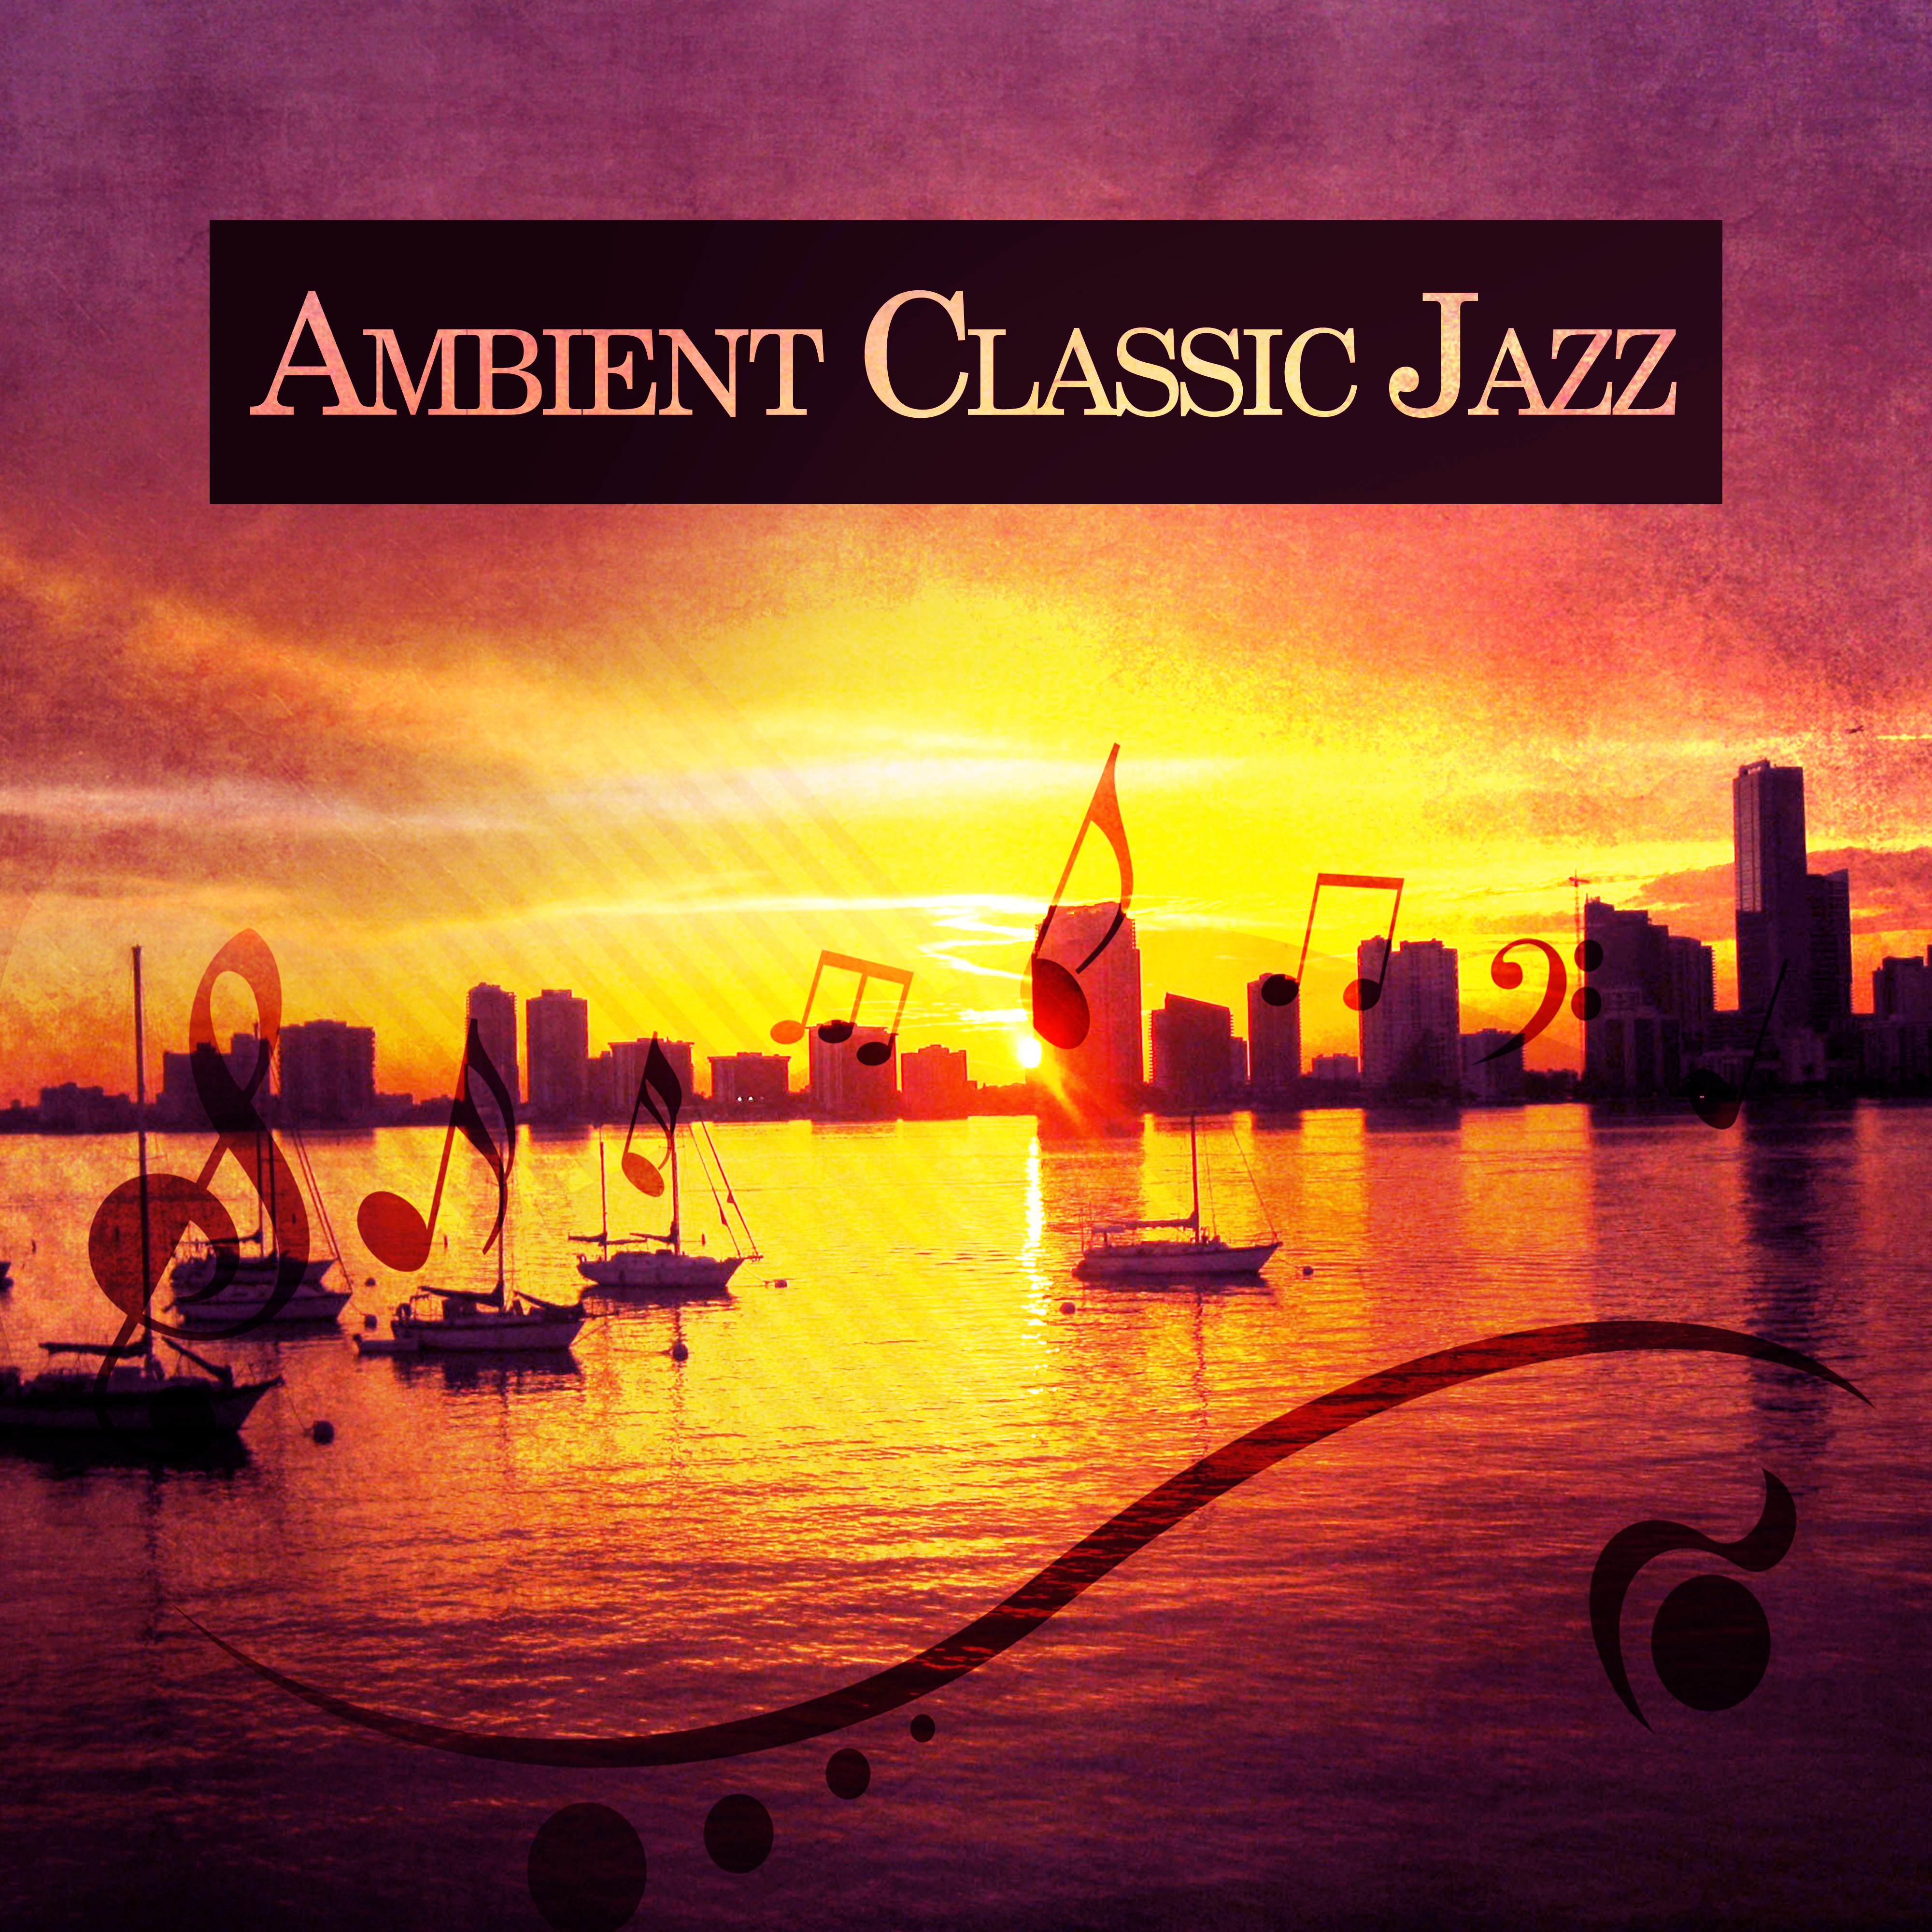 Ambient Classic Jazz – Instrumental Music, Jazz for Relax, Smooth Jazz, Piano Melodies